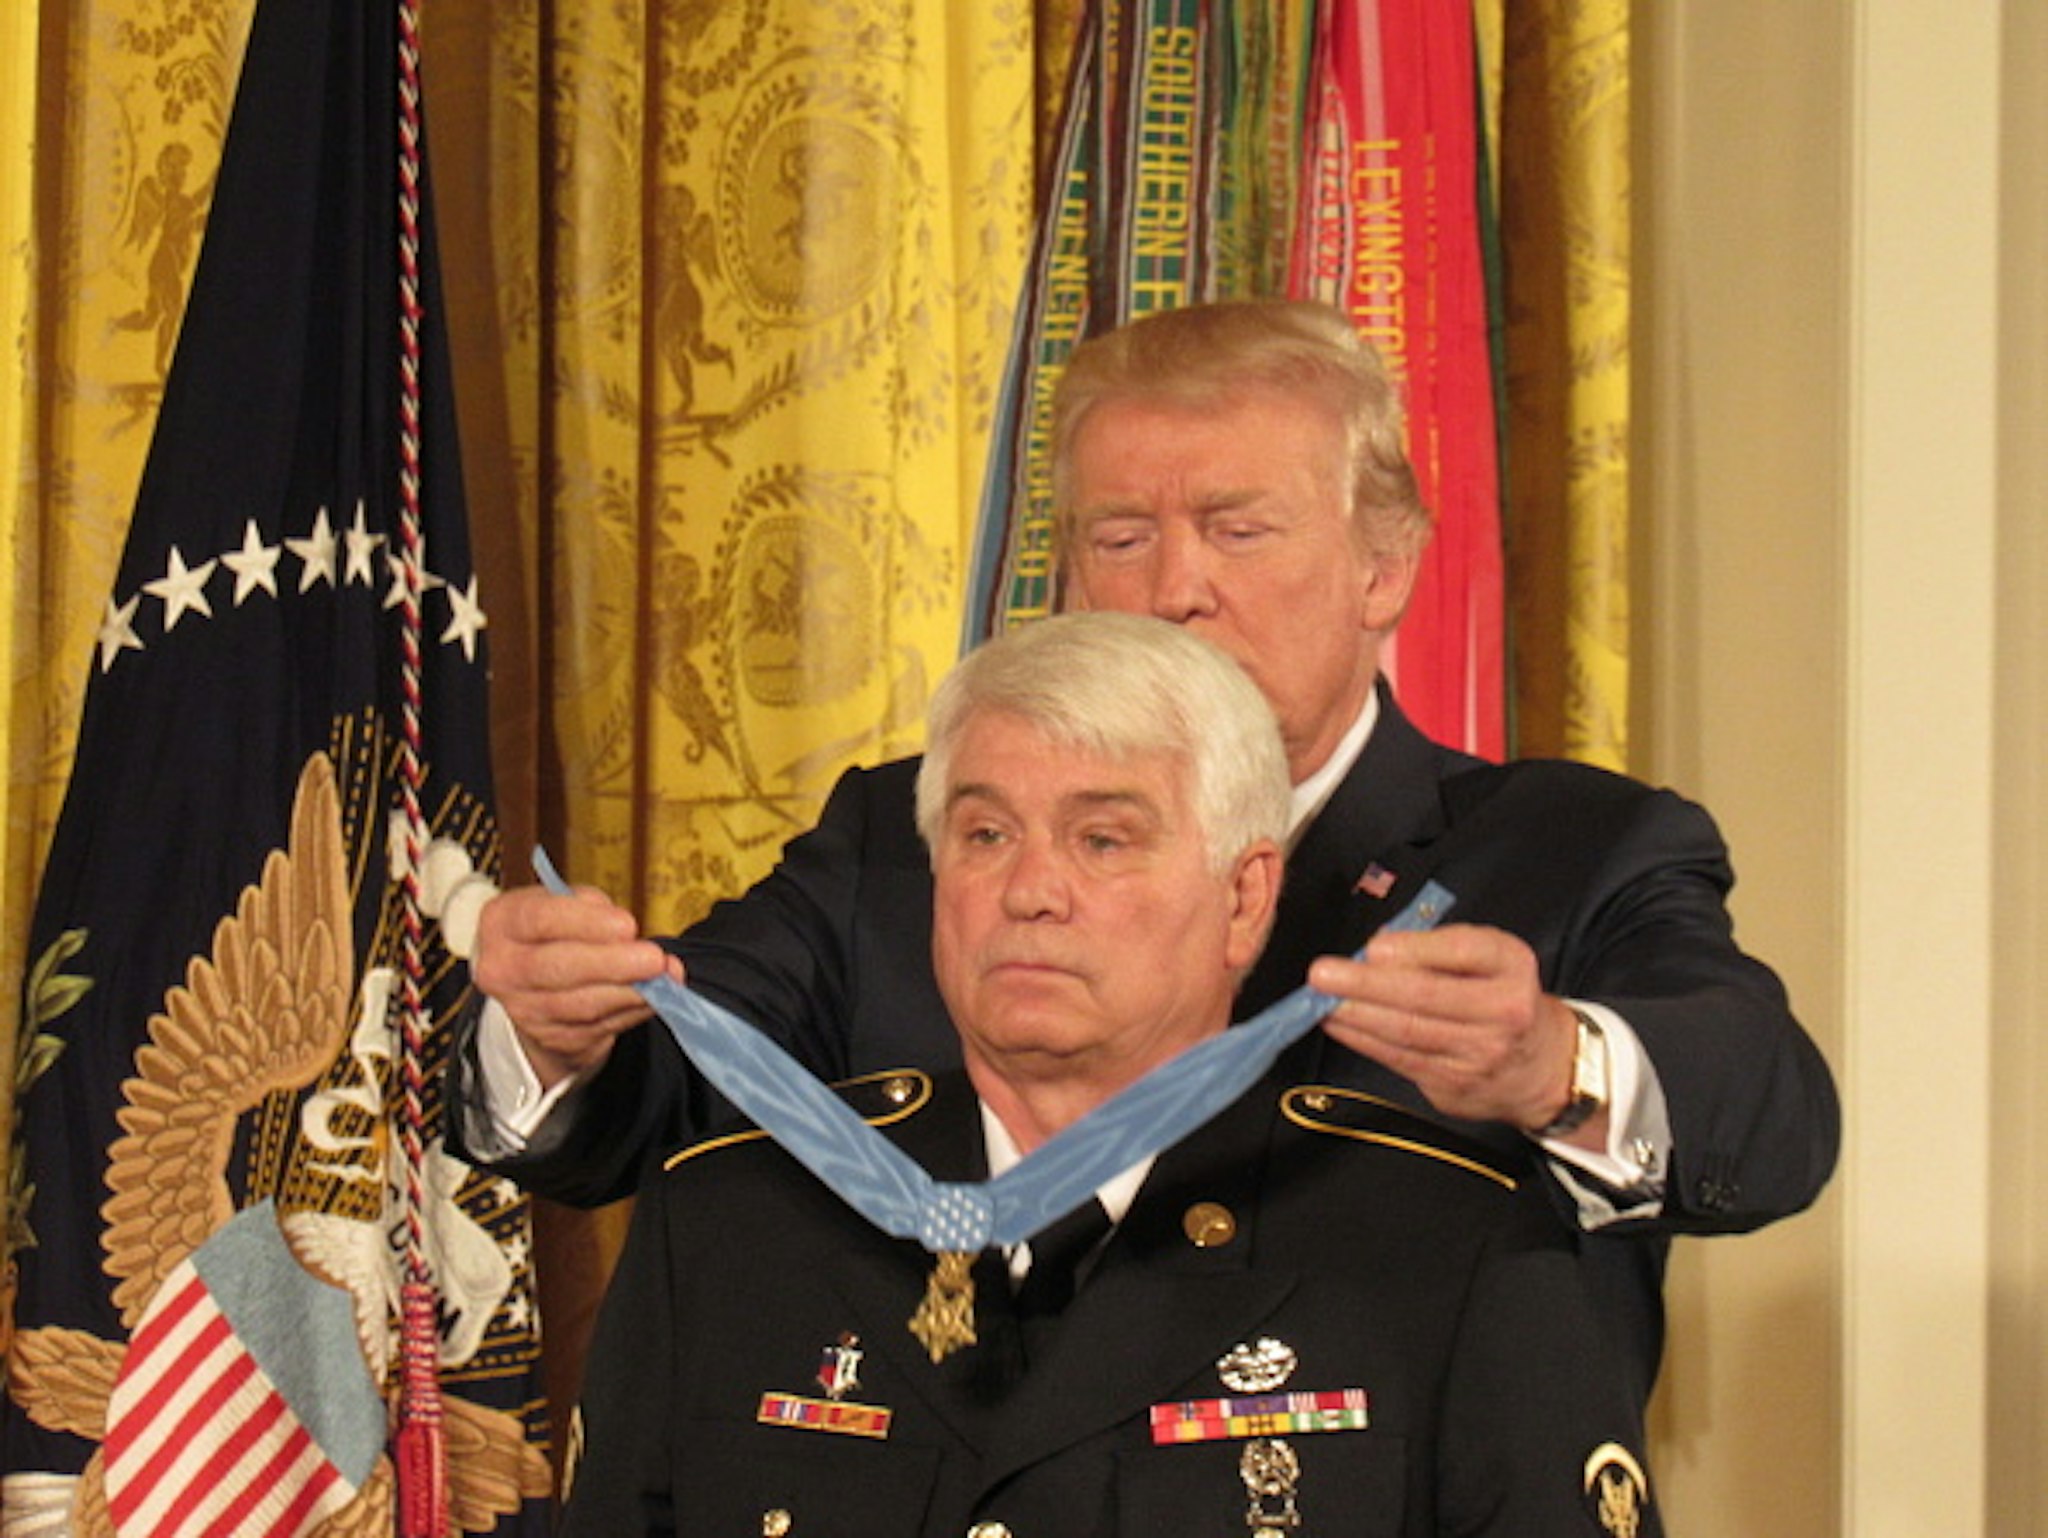 U.S. President Donald Trump presents the Medal of Honor to former Army Specialist James McCloughan (L) of South Haven, Michigan, during an East Room ceremony at the White House July 31, 2017 in Washington, DC. McCloughan is awarded with the medal for his heroic acts as a combat medic during the Vietnam War. .